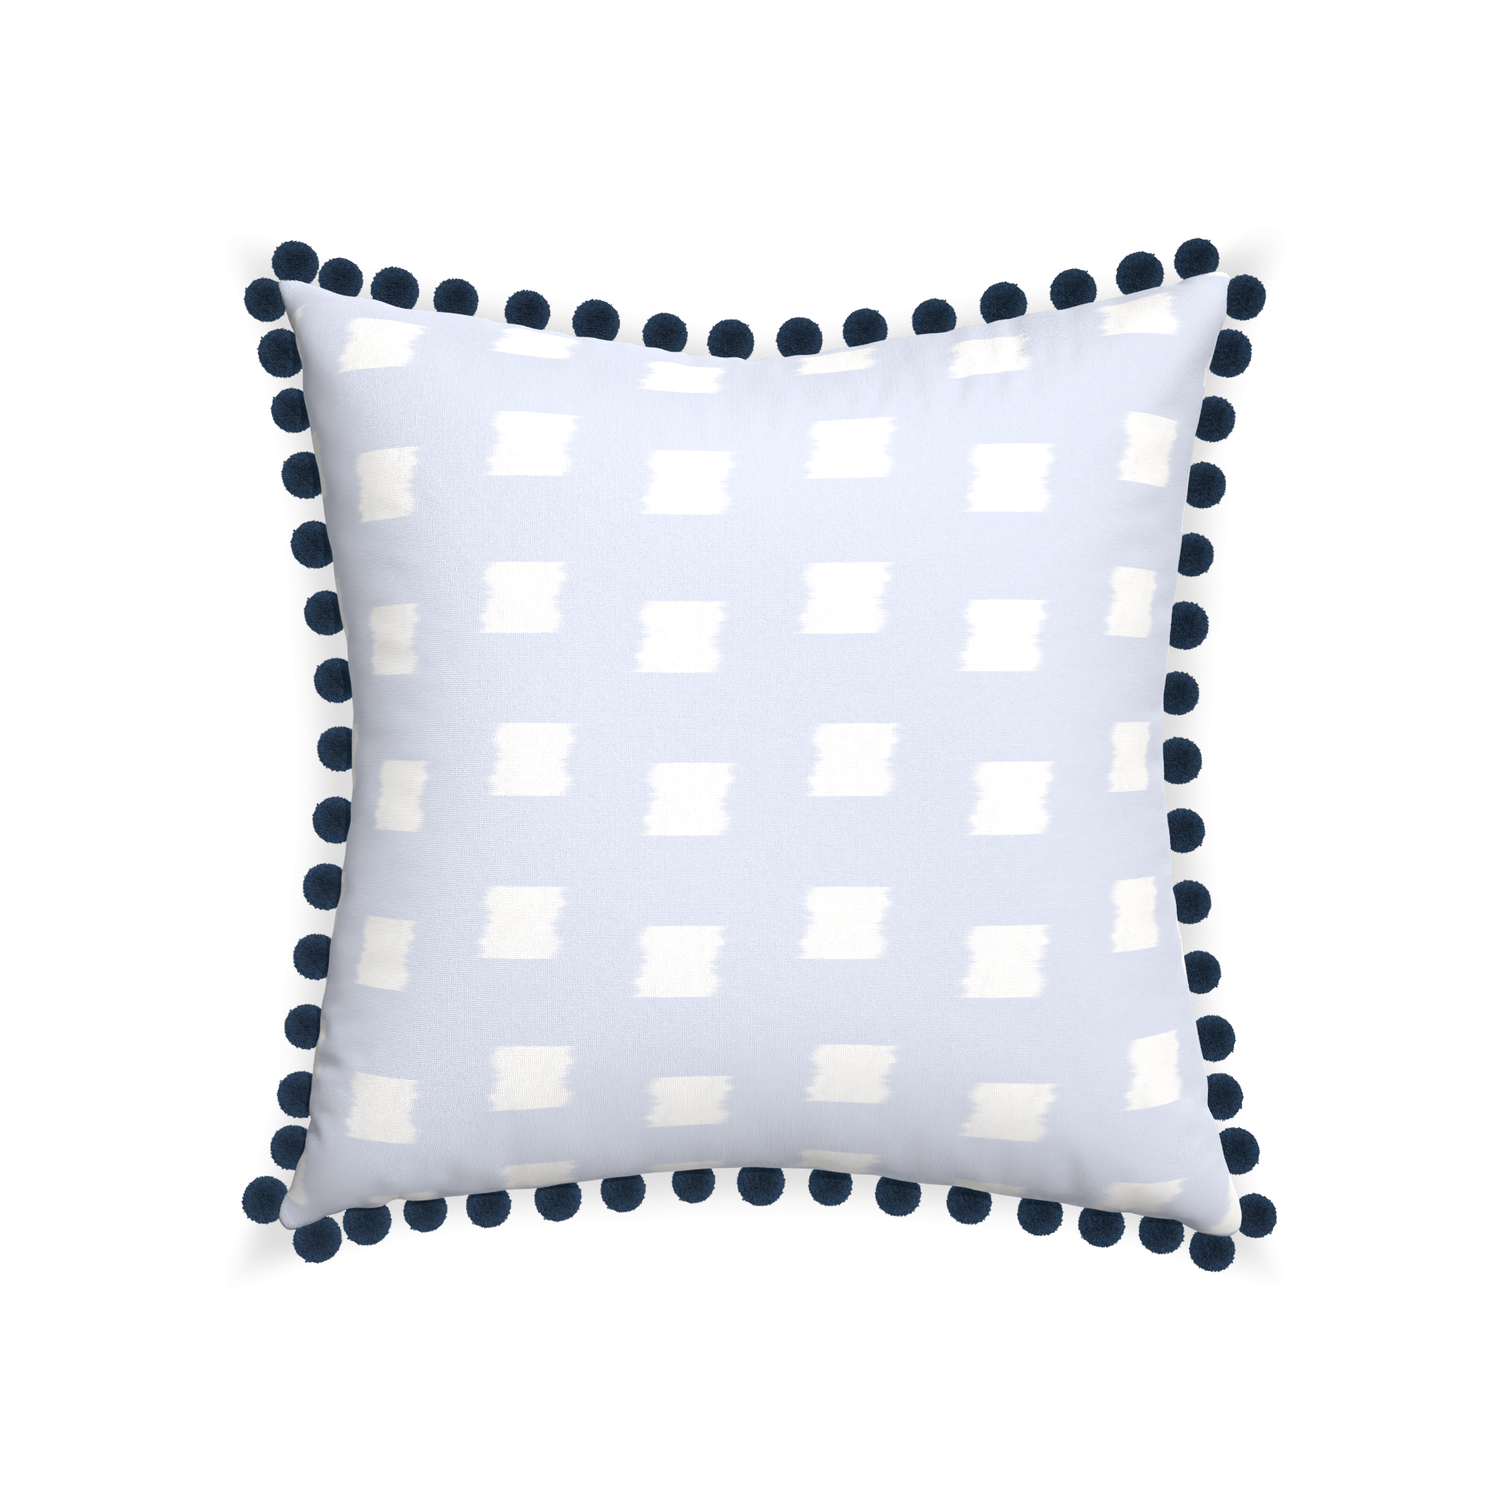 22-square denton custom sky blue patternpillow with c on white background